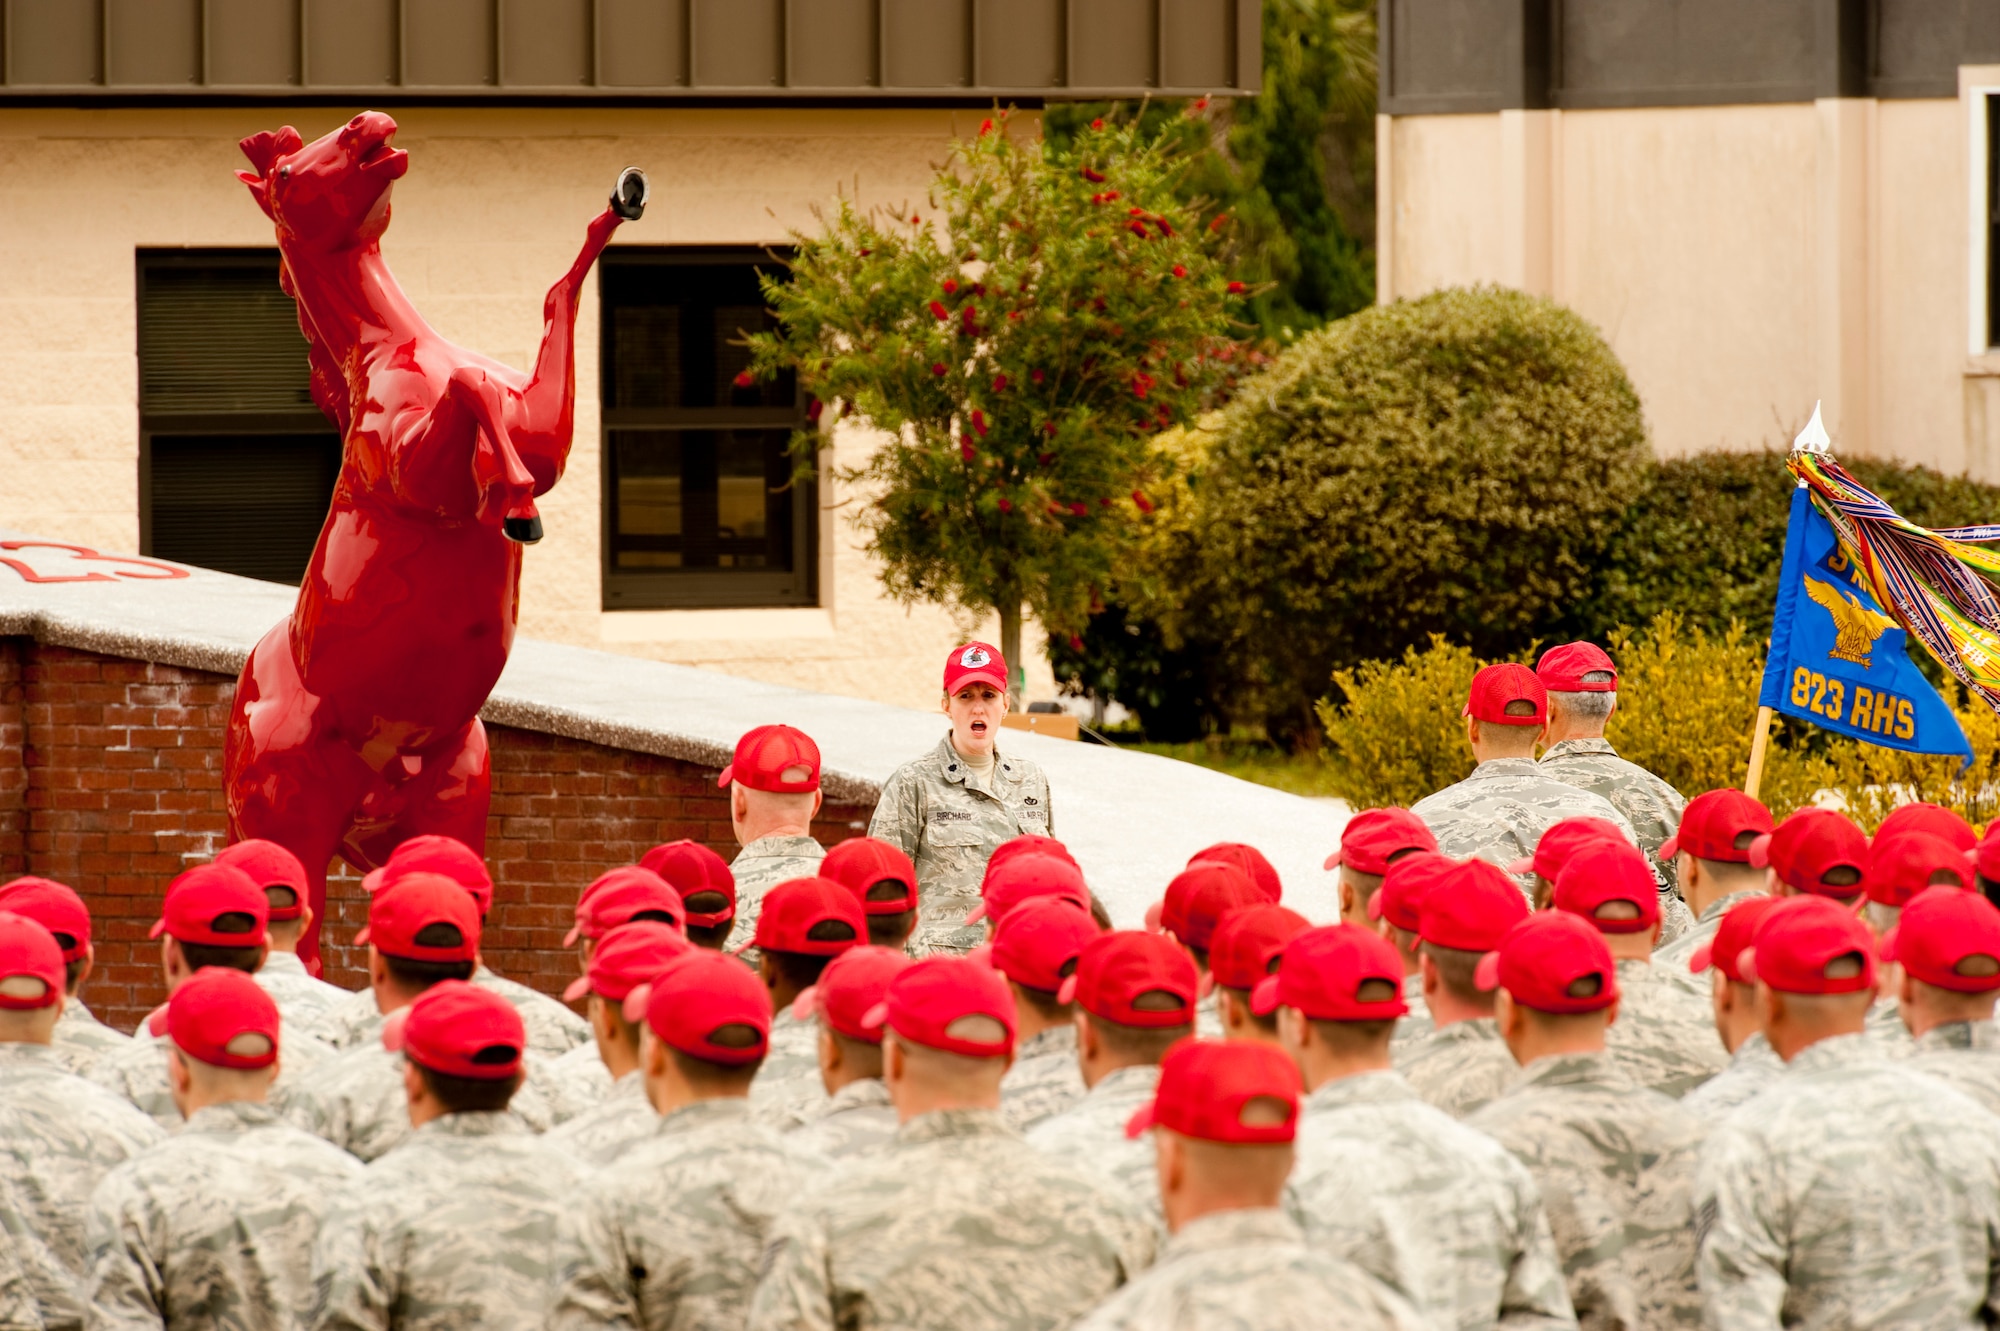 Lt. Col. Ann Birchard, commander of 823rd RED HORSE Squadron, addresses the Airmen of the squadron about recently passed retired Brig. Gen. William Thomas Meredith.  Meredith retired in 1973 and established Air Force organizations such as RED HORSE.  (U.S. Air Force photo by Airman 1st Class Benjamin D. Kim)